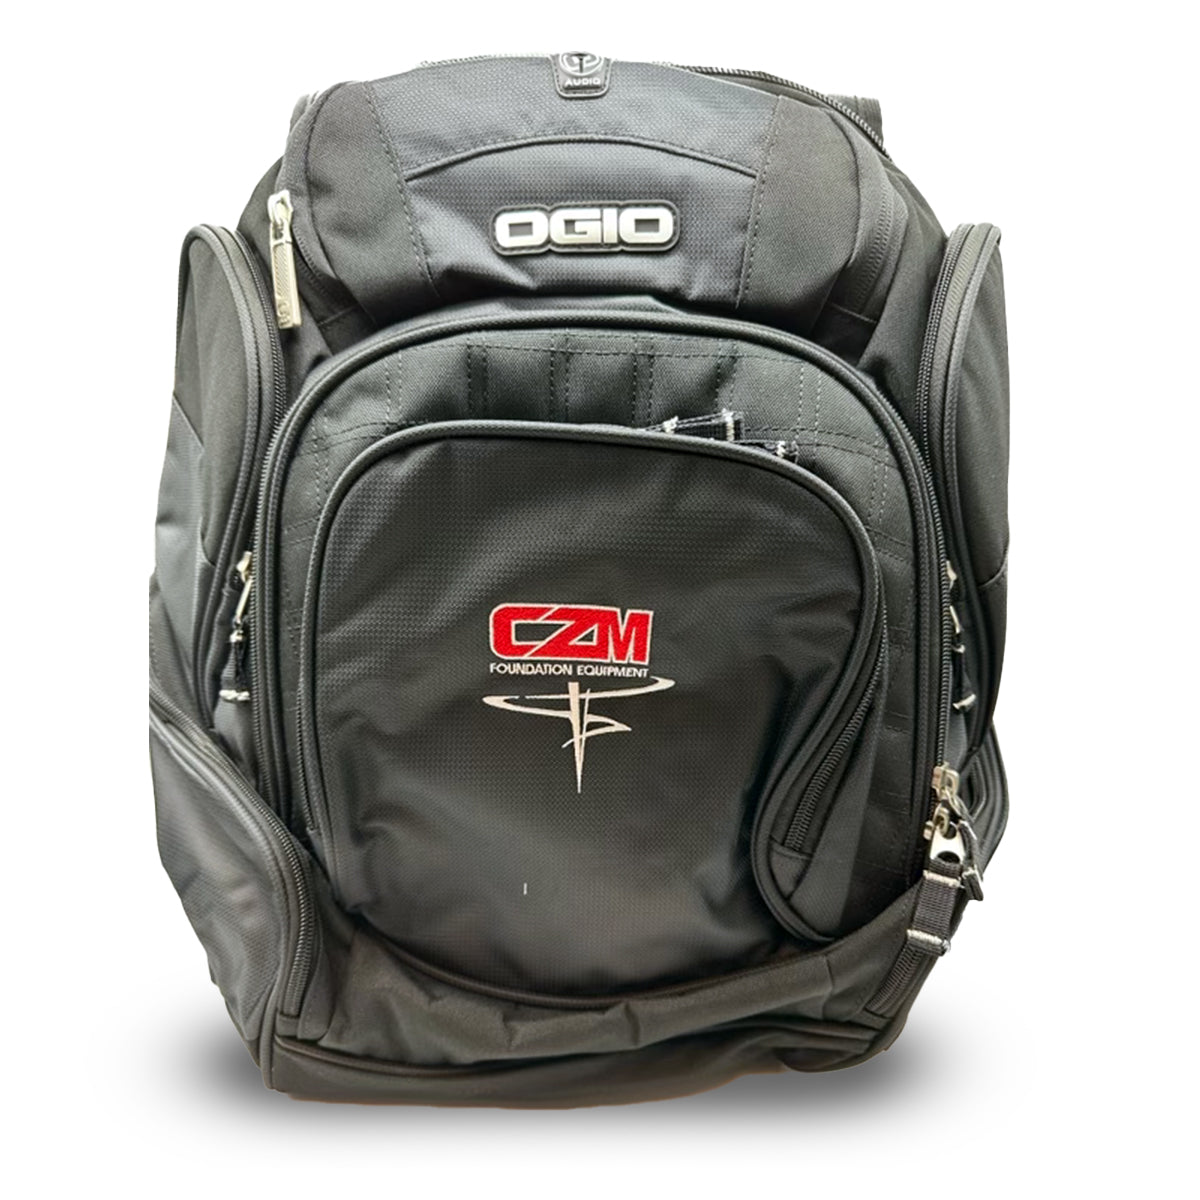 CZM Backpack